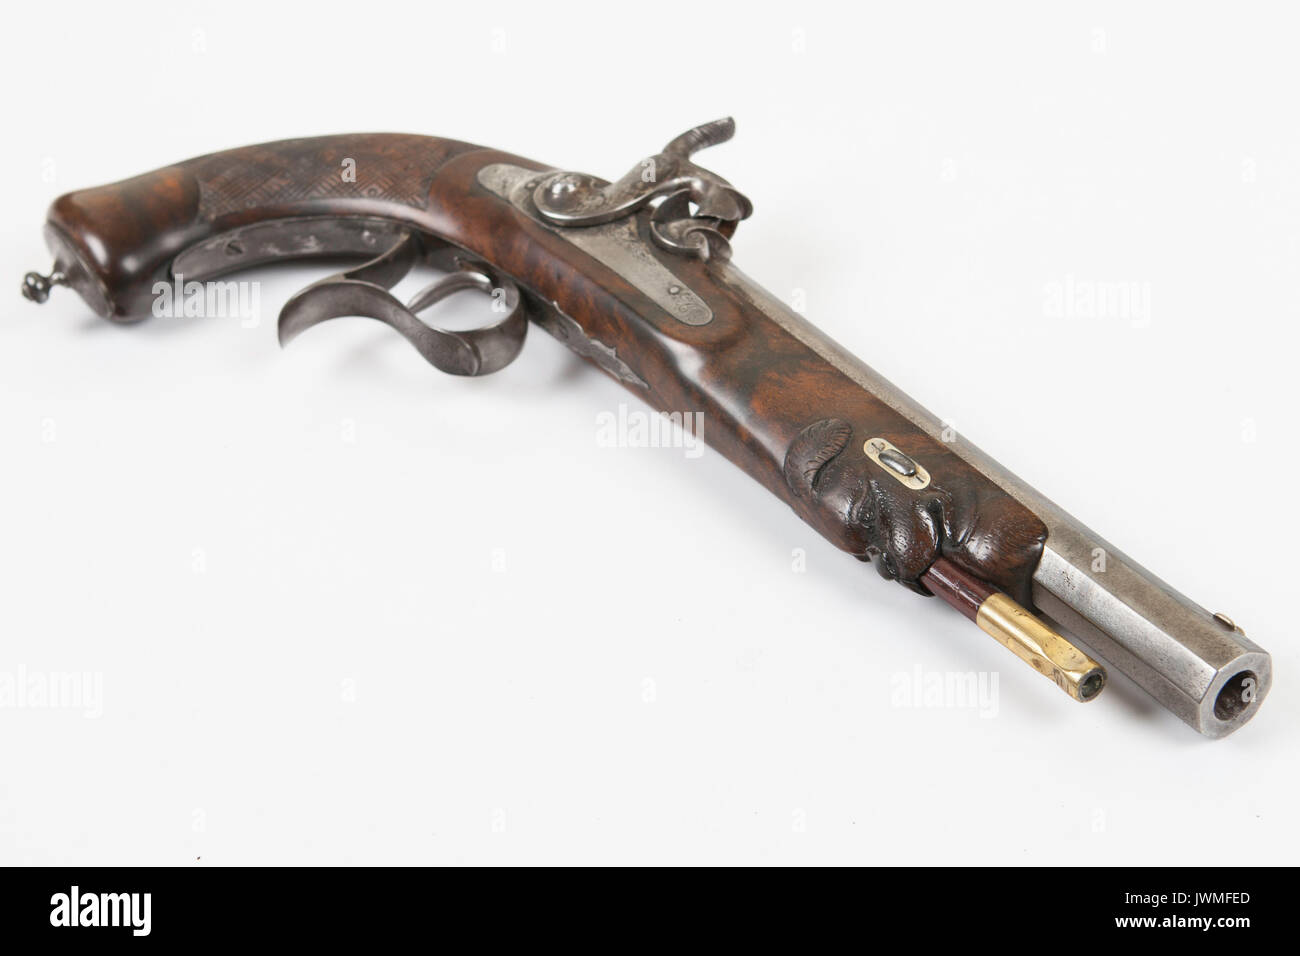 An antique percussion pistol on a white background Stock Photo